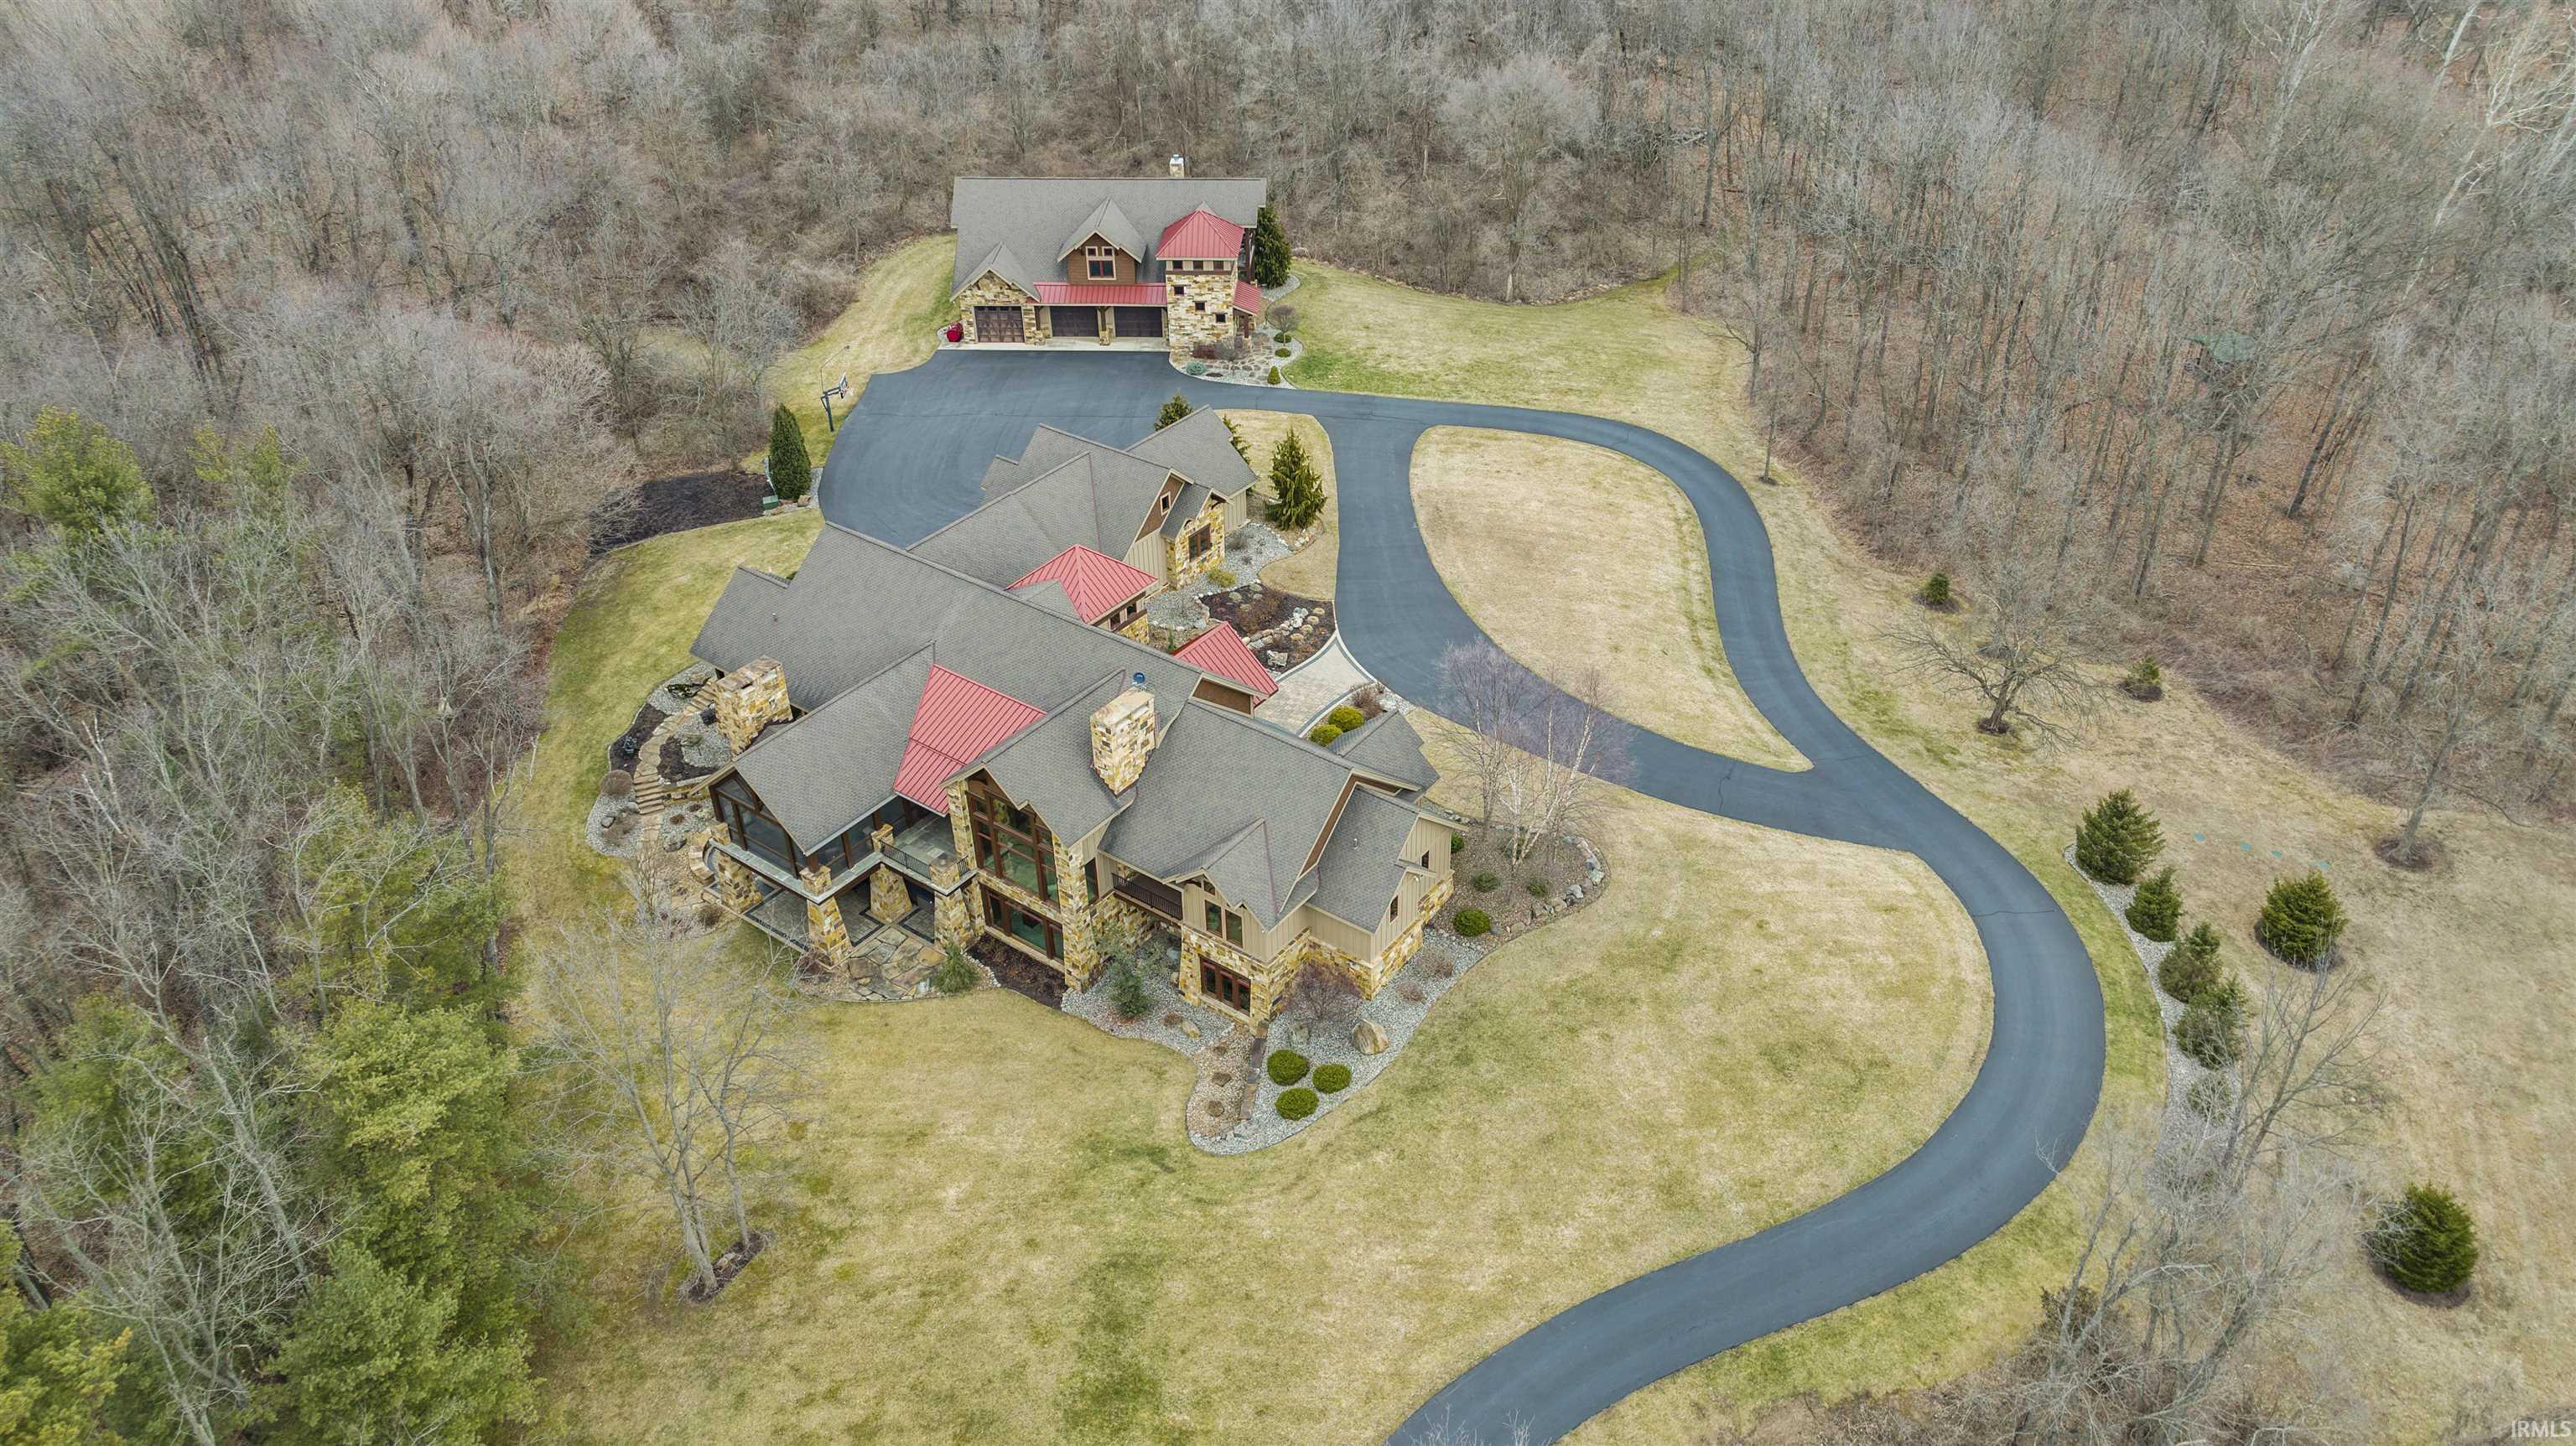 Just 1 mile from Ft. Wayne sits this one-of-a-kind private oasis w/12,000+ sq./ft. (2010) custom home and 3,000+ sq/foot Barn-dominium on 59+ partially wooded acres w/1/4-mile paved driveway and 1.3-acre stocked pond. Masterfully designed and crafted, the properties feature natural stone, Indiana-sourced wood for beams, stunning hardwoods, wood ceilings, slate tile, sweeping views, luxury finishes at every turn, pro landscape/hardscape (irrigated w/LED lighting), and state-of-the-art technology. The main home features open concept living w/2-story beamed timber-frame ceilings and floor-to-ceiling windows, 2-story stone fireplace + large dining area. The chef's kitchen boasts double granite islands, instant hot water, 6- burner/griddle Wolf cooktop + double Wolf wall ovens, Subzero oversized side-by-side, gracious walk-in pantry, 2 Asko dishwashers, & stunning custom built-ins. French doors lead to the timber-frame screened porch w/slate floors, 2-story stone fireplace, built-in stone grill, stunning views. The primary en-suite boasts a private balcony, oversized walk-in stone shower + copper accents, double vanity w/granite/stone, enormous walk-in closets & is cleverly connected to laundry room & mud-rooms. Off the foyer, a stone accented hallway leads to BRs 2 & 3, both large w/ stone/tile ensuites, walk-in closets and 12' ceilings, and the library (4th BR) w/private balcony, en-suite, and fabulous built-in shelves + desk. Don’t miss the 2nd story loft overlooking foyer and great rooms (more views!) w/ game/lounge area in the middle and doors on either end to walk-in floored attic (*future bedrooms). The finished walk-out lower level is an entertainers' paradise - 12-ft. ceilings, chef’s kitchen w/granite bar (seating for 6), open to living/game room w/stone fireplace. Sliders lead to fabulous covered outdoor space w/hot tub, 2-way stone fireplace, outdoor TV (*future pool). A large guest suite, tricked-out theatre room, fitness room, safe room (“Fort Knox”), and half bath complete the lower level. The detached Barn-dominium boasts 4 extra-long tandem bays (8+ car temperature-controlled), dog run, heated workshop (built-ins + epoxy floor), half bath, laundry room & mud room on the main level. Upstairs, 1700+ sq. ft., 2 BR/1 BA (dual shower + double vanity), luxury living area (slate, hardwoods, stone, granite) w/open concept, stone fireplace, and vaulted wood ceiling w/reclaimed wood beams. Security tied to main house + wired for sound.